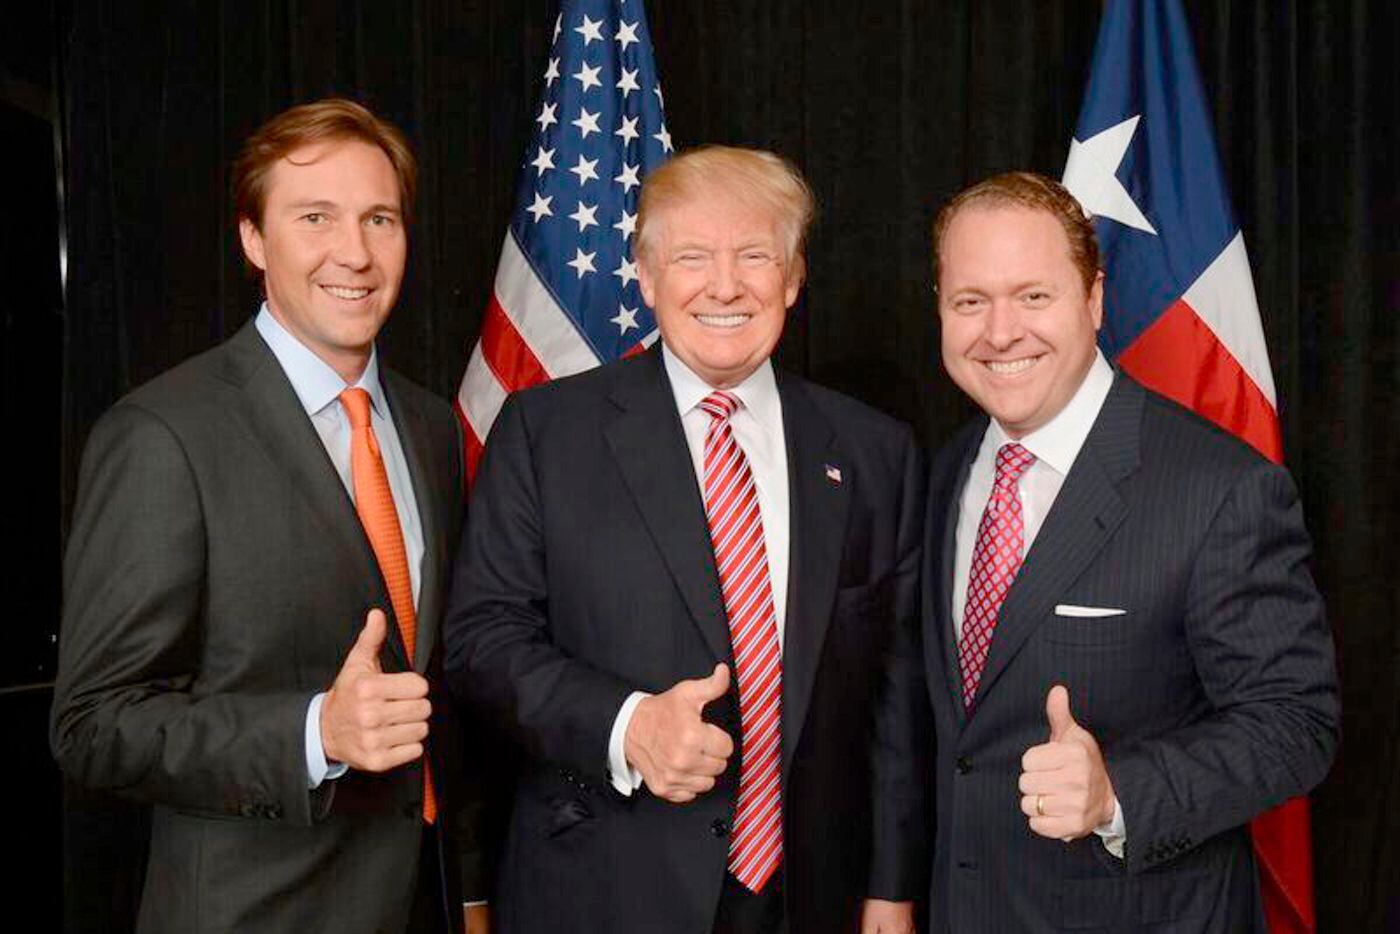 Tommy Hicks Jr., (from left) left, Donald Trump and Gentry Beach.  Hicks and Beach, two Dallas businessmen were instrumental in raising millions for the campaign and are credited with helping shape the successful upset campaign.